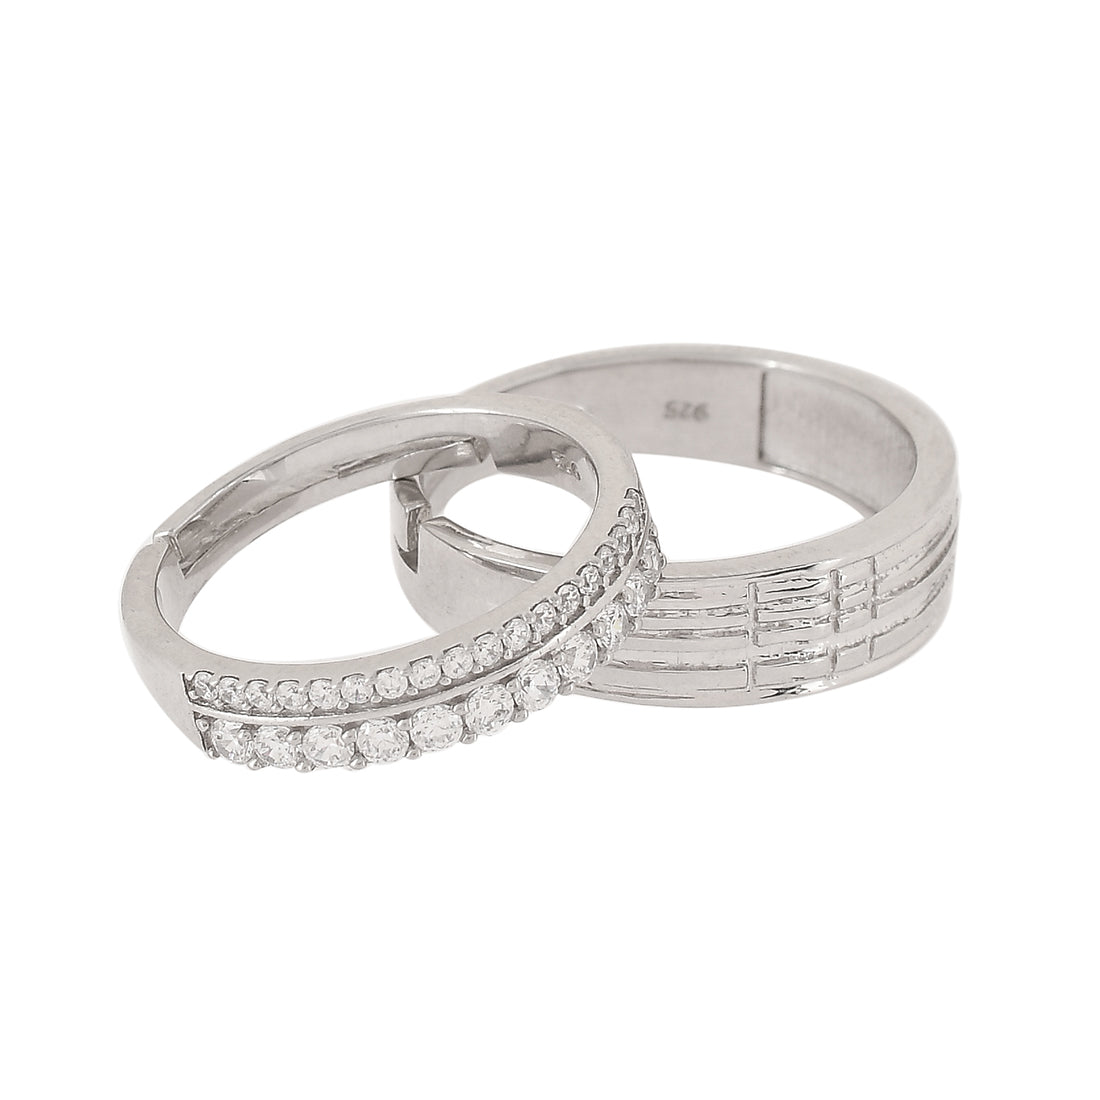 Matching Wedding Bands FT220 of White Gold with 6 Diamonds